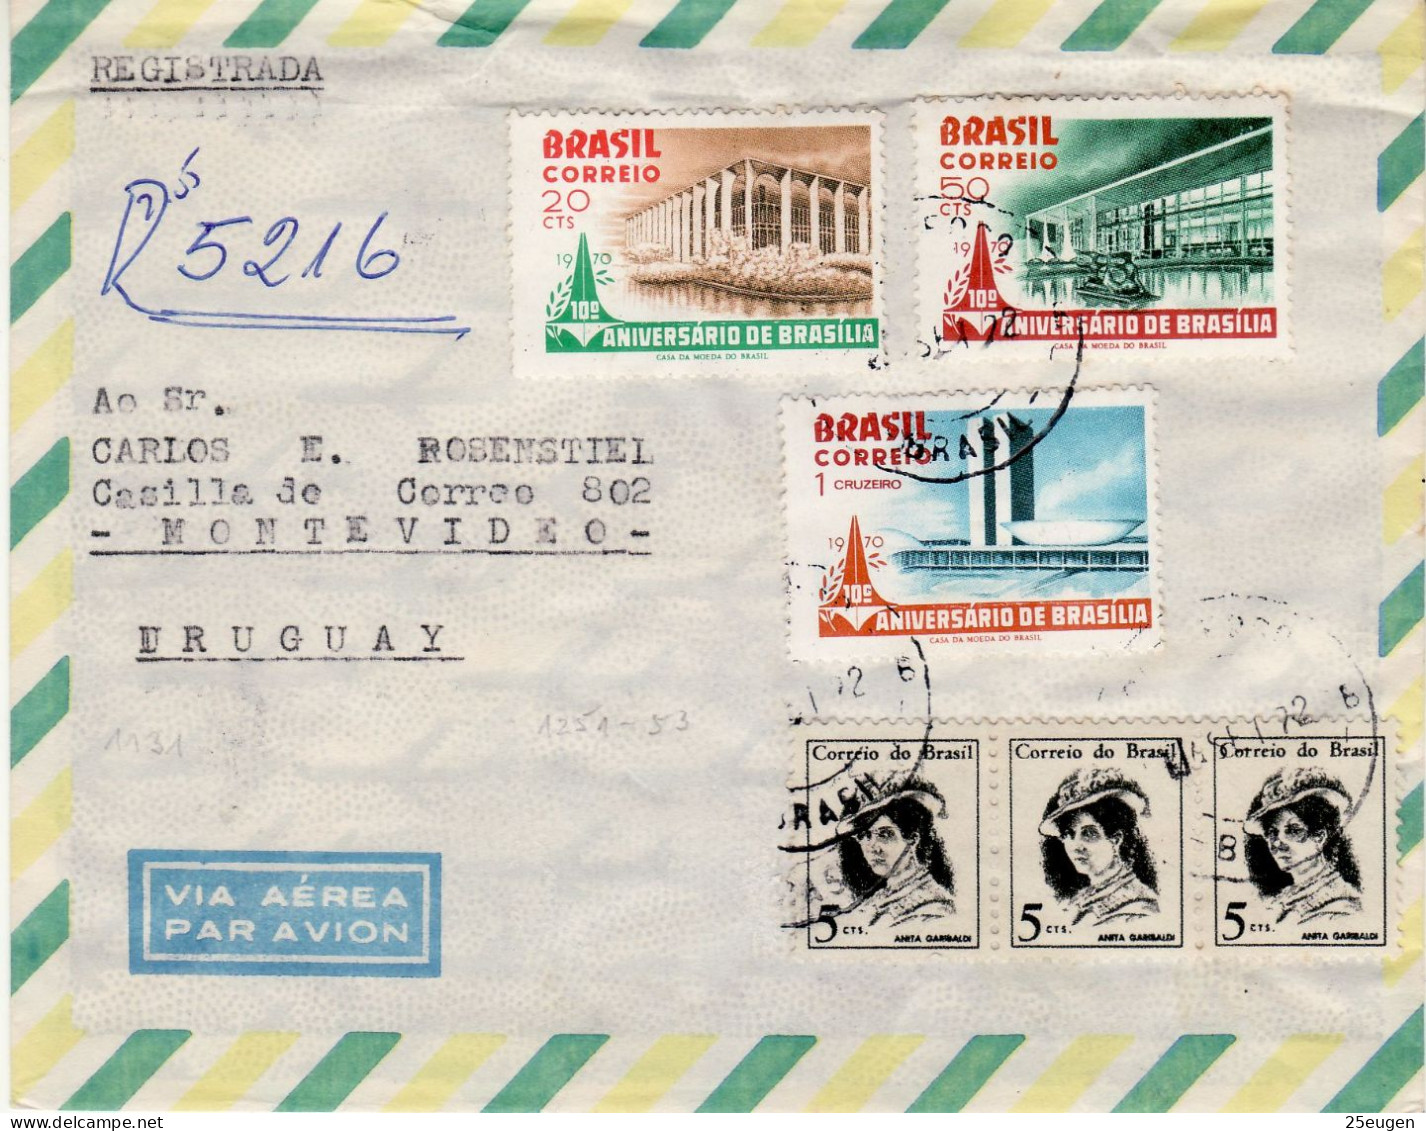 BRAZIL 1972 AIRMAIL R - LETTER SENT FROM RIO DE JANEIRO TO MONTEVIDEO - Covers & Documents